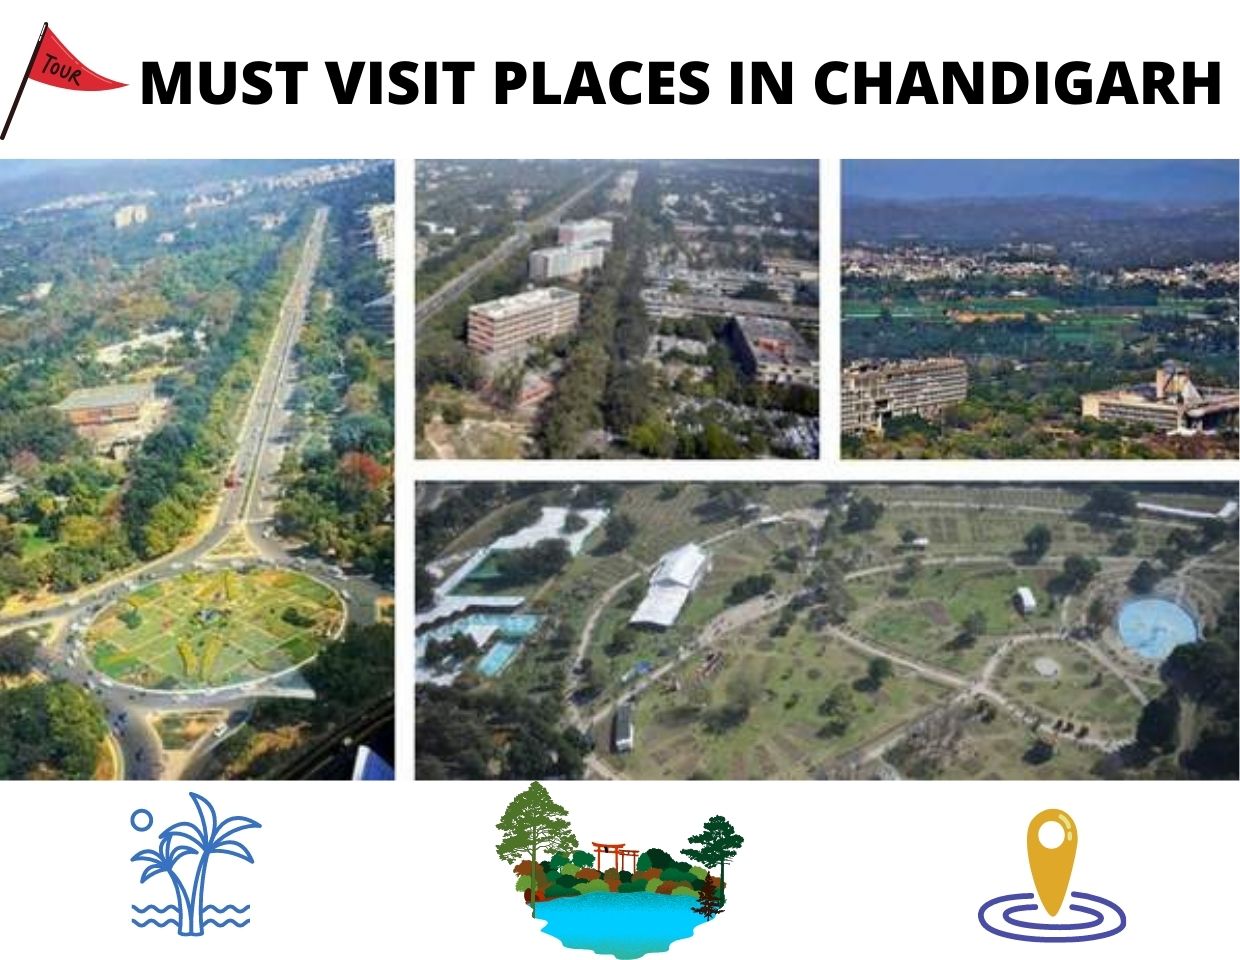 MUST VISIT PLACES IN CHANDIGARH